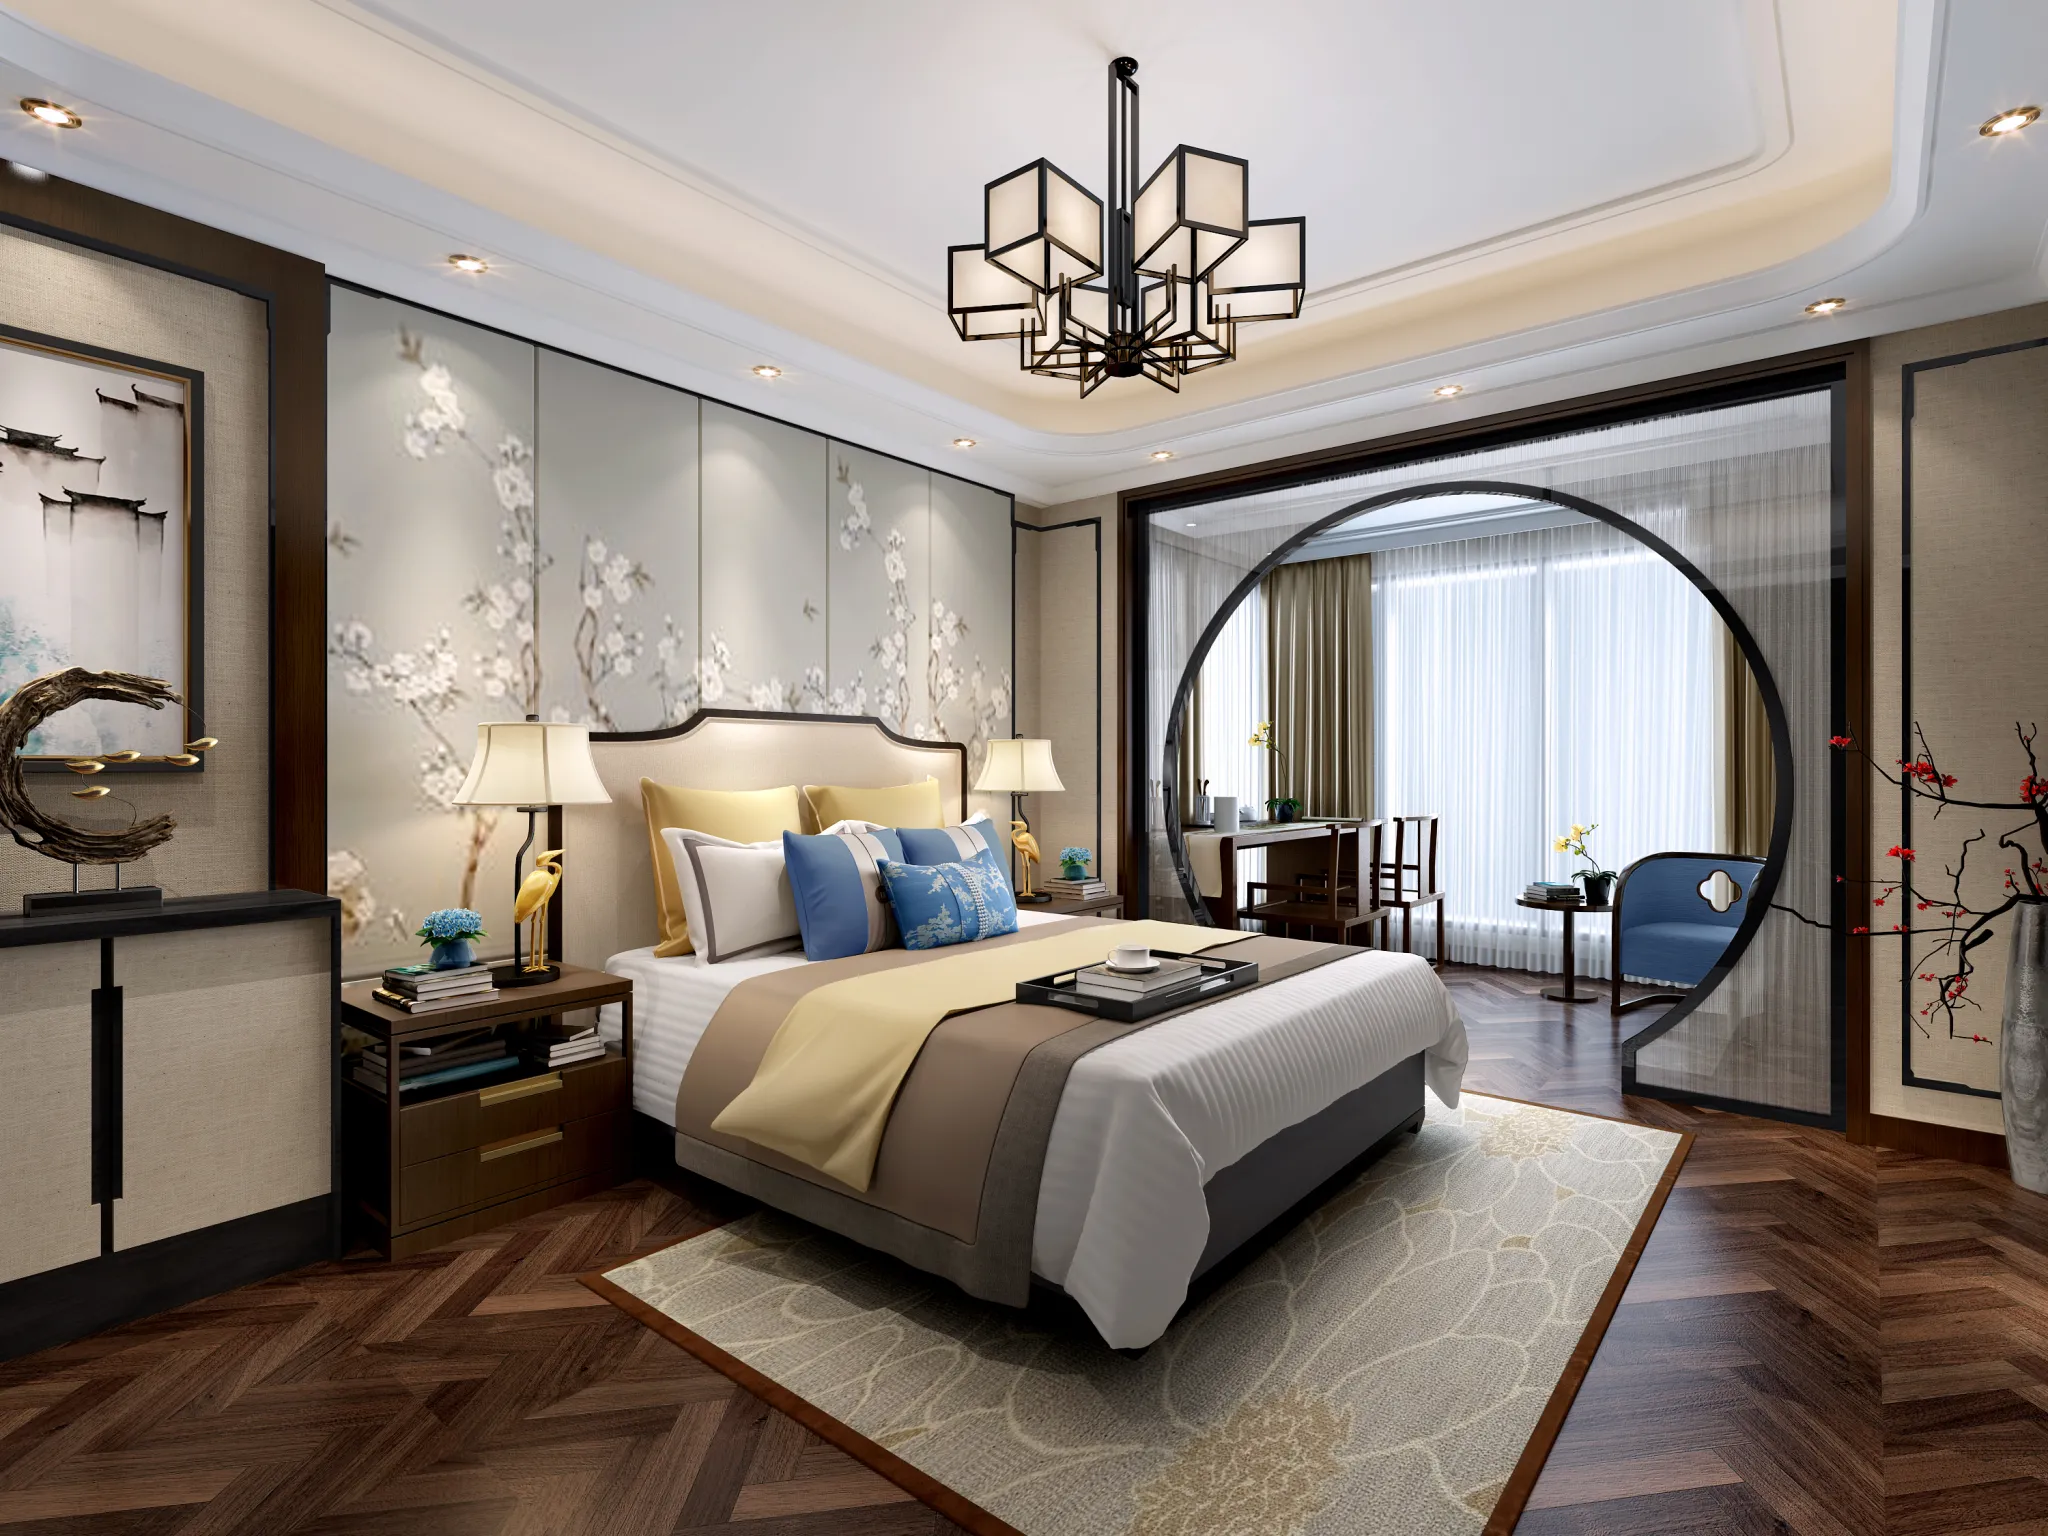 DESMOD INTERIOR 2021 (VRAY)/5. BEDROOM – 2. CHINESE STYLES – 019